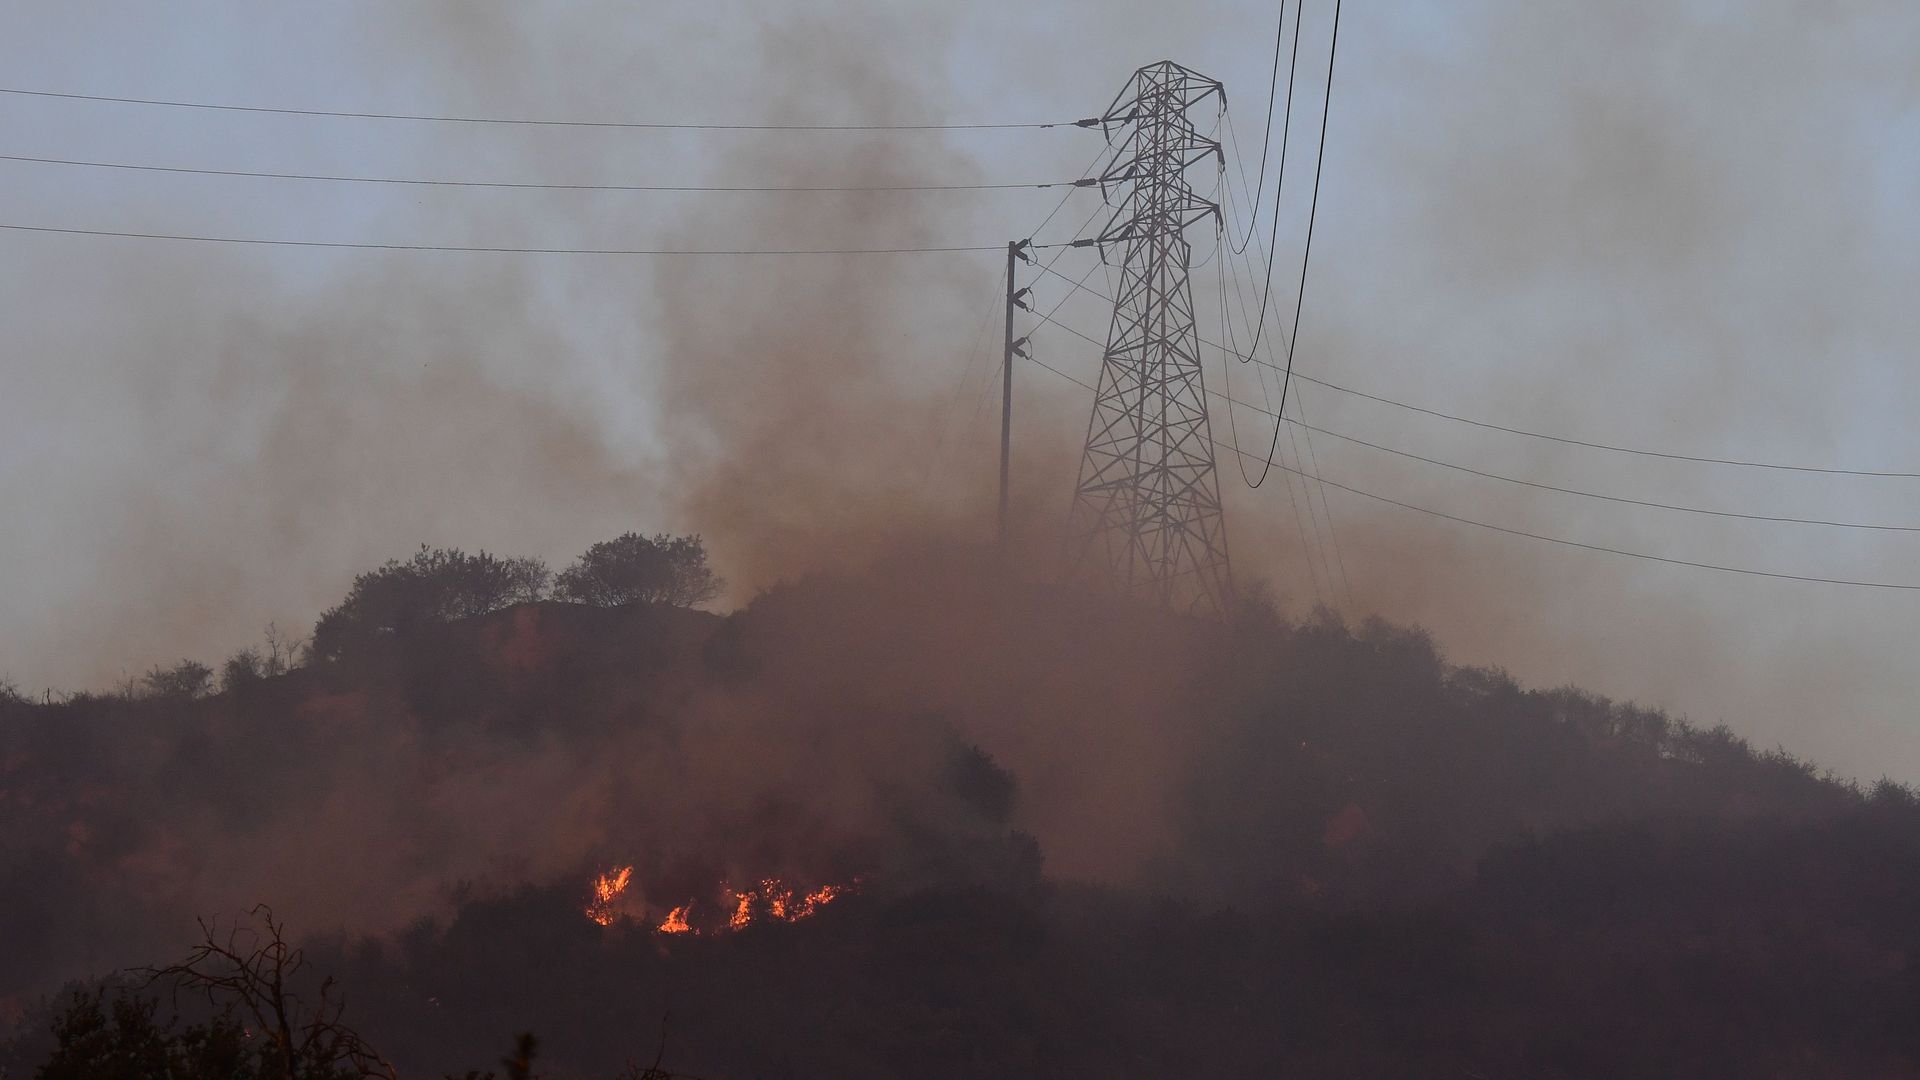 Fire burns near power lines at the Thomas Fire, December 16, 2017 in Montecito, California.